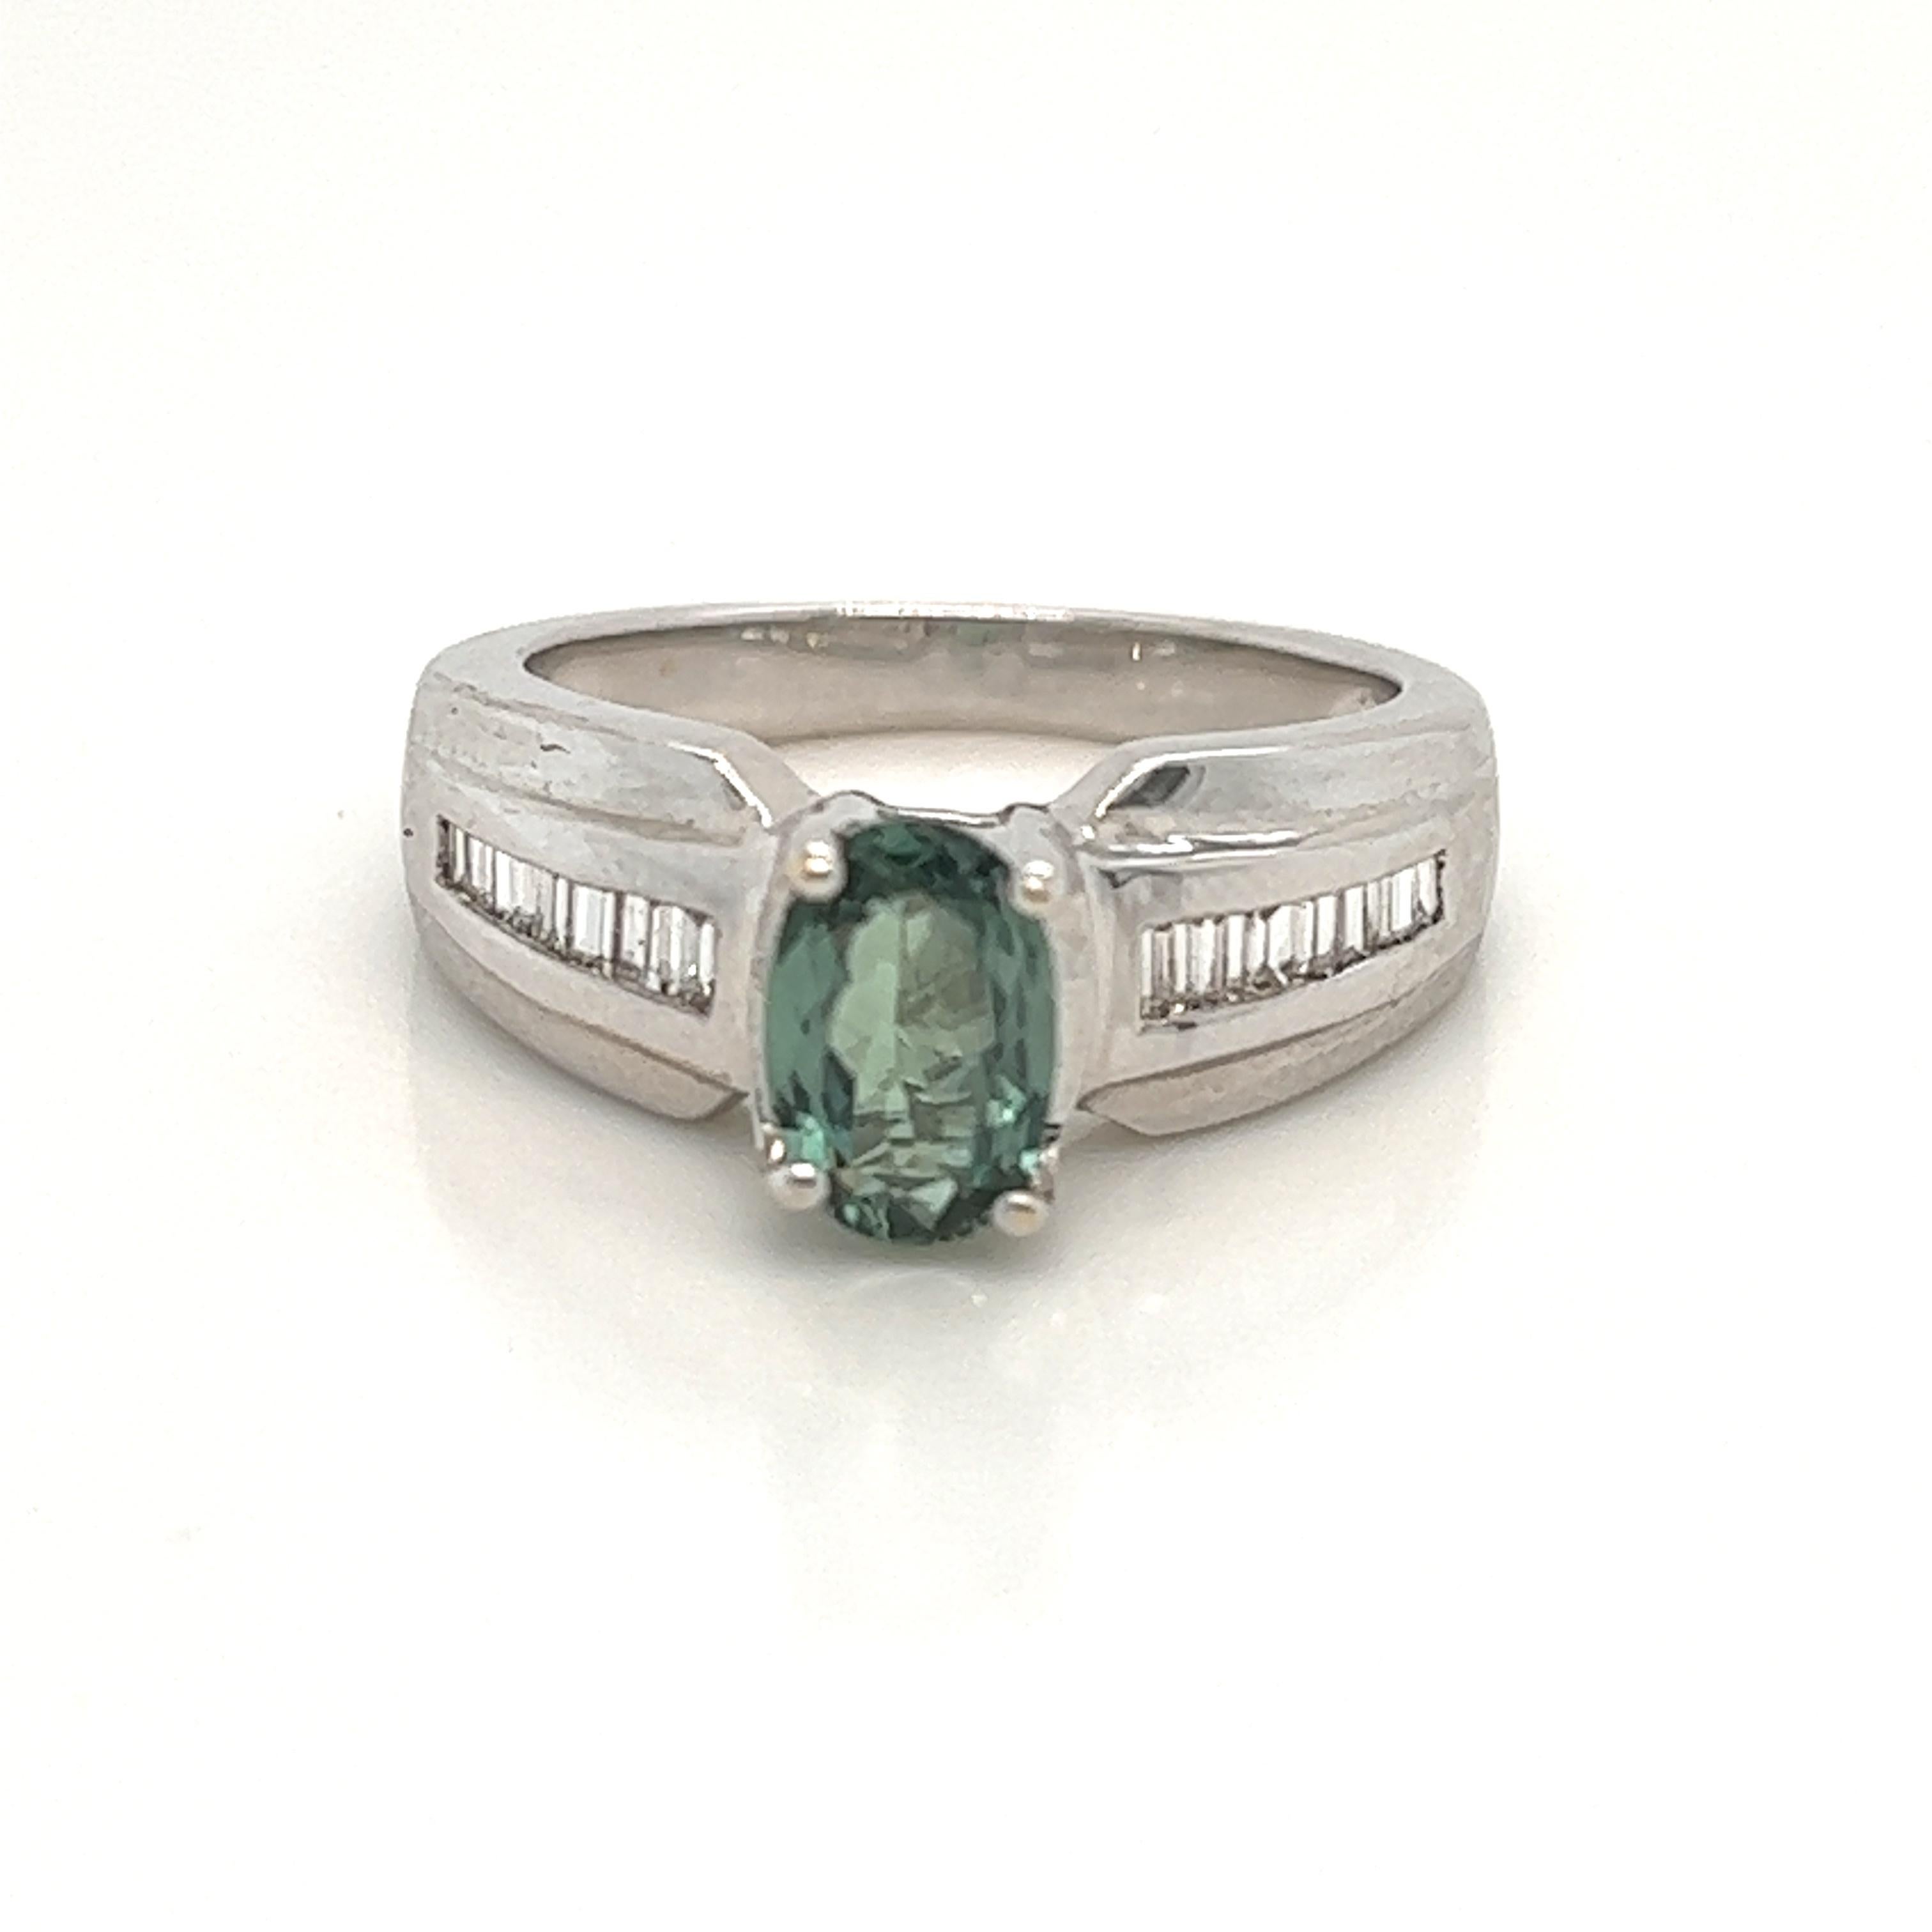 This is a gorgeous natural AAA quality Oval Alexandrite with Baguette diamonds that is set in solid 18K white gold. This ring features a natural 1.21 carat oval alexandrite that is certified by the Gemological Institute of America (GIA). The ring is